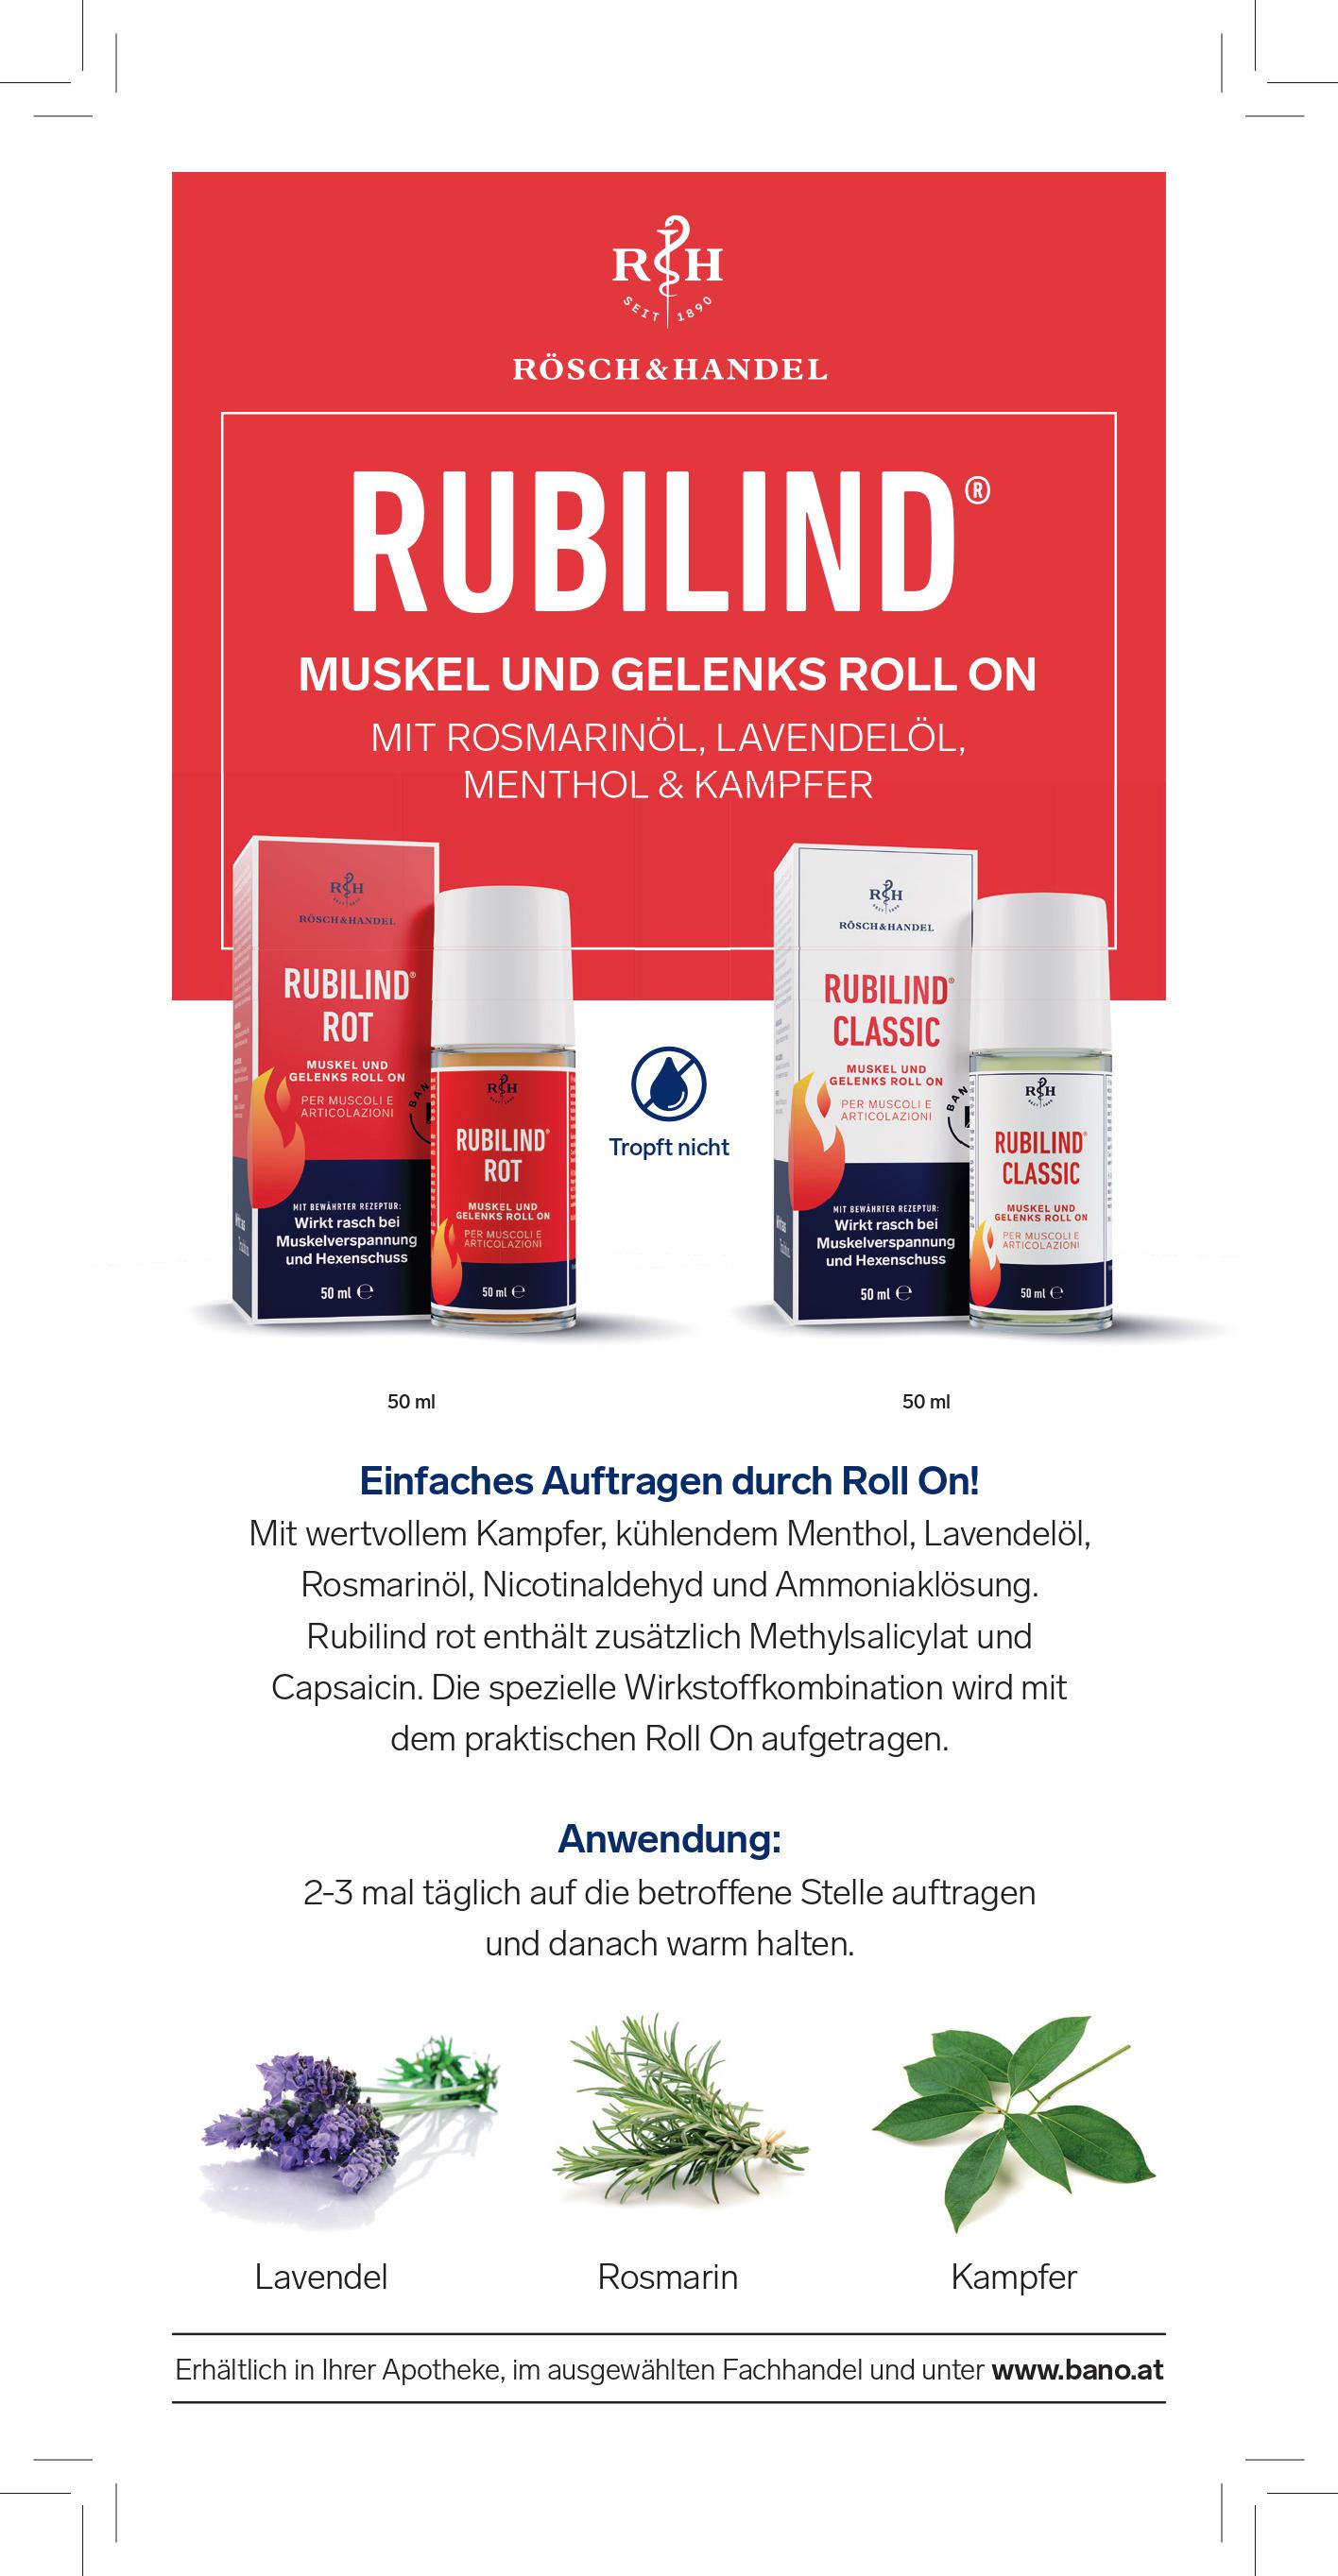 Rubilind Rot Gel Roll - On pour muscles et articulations